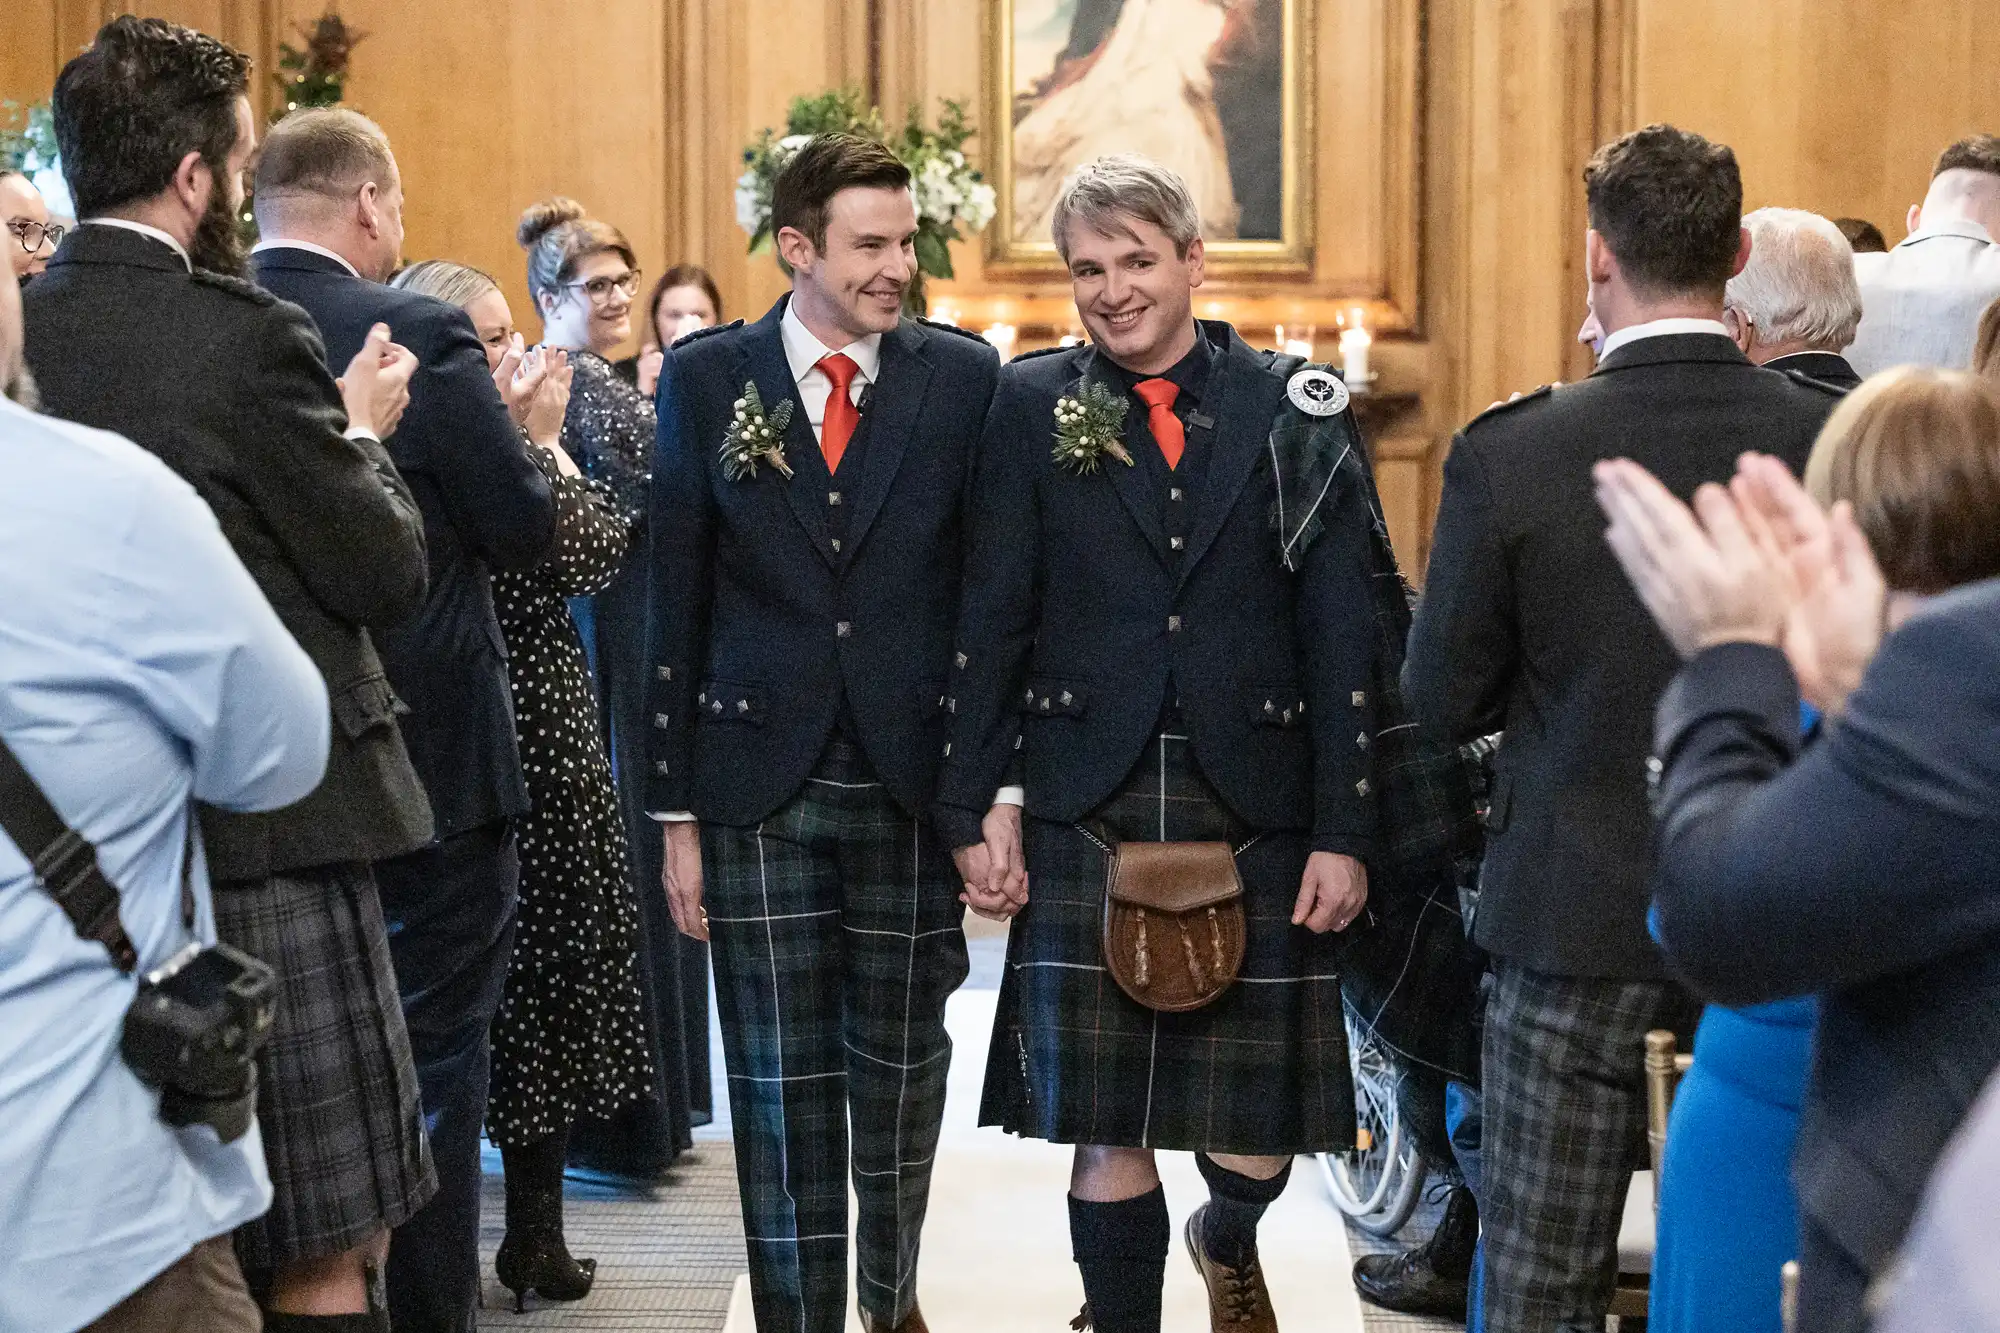 Two men in matching attire, including kilts and jackets, hold hands and smile as they walk down an aisle, surrounded by clapping guests in a warmly lit indoor setting.